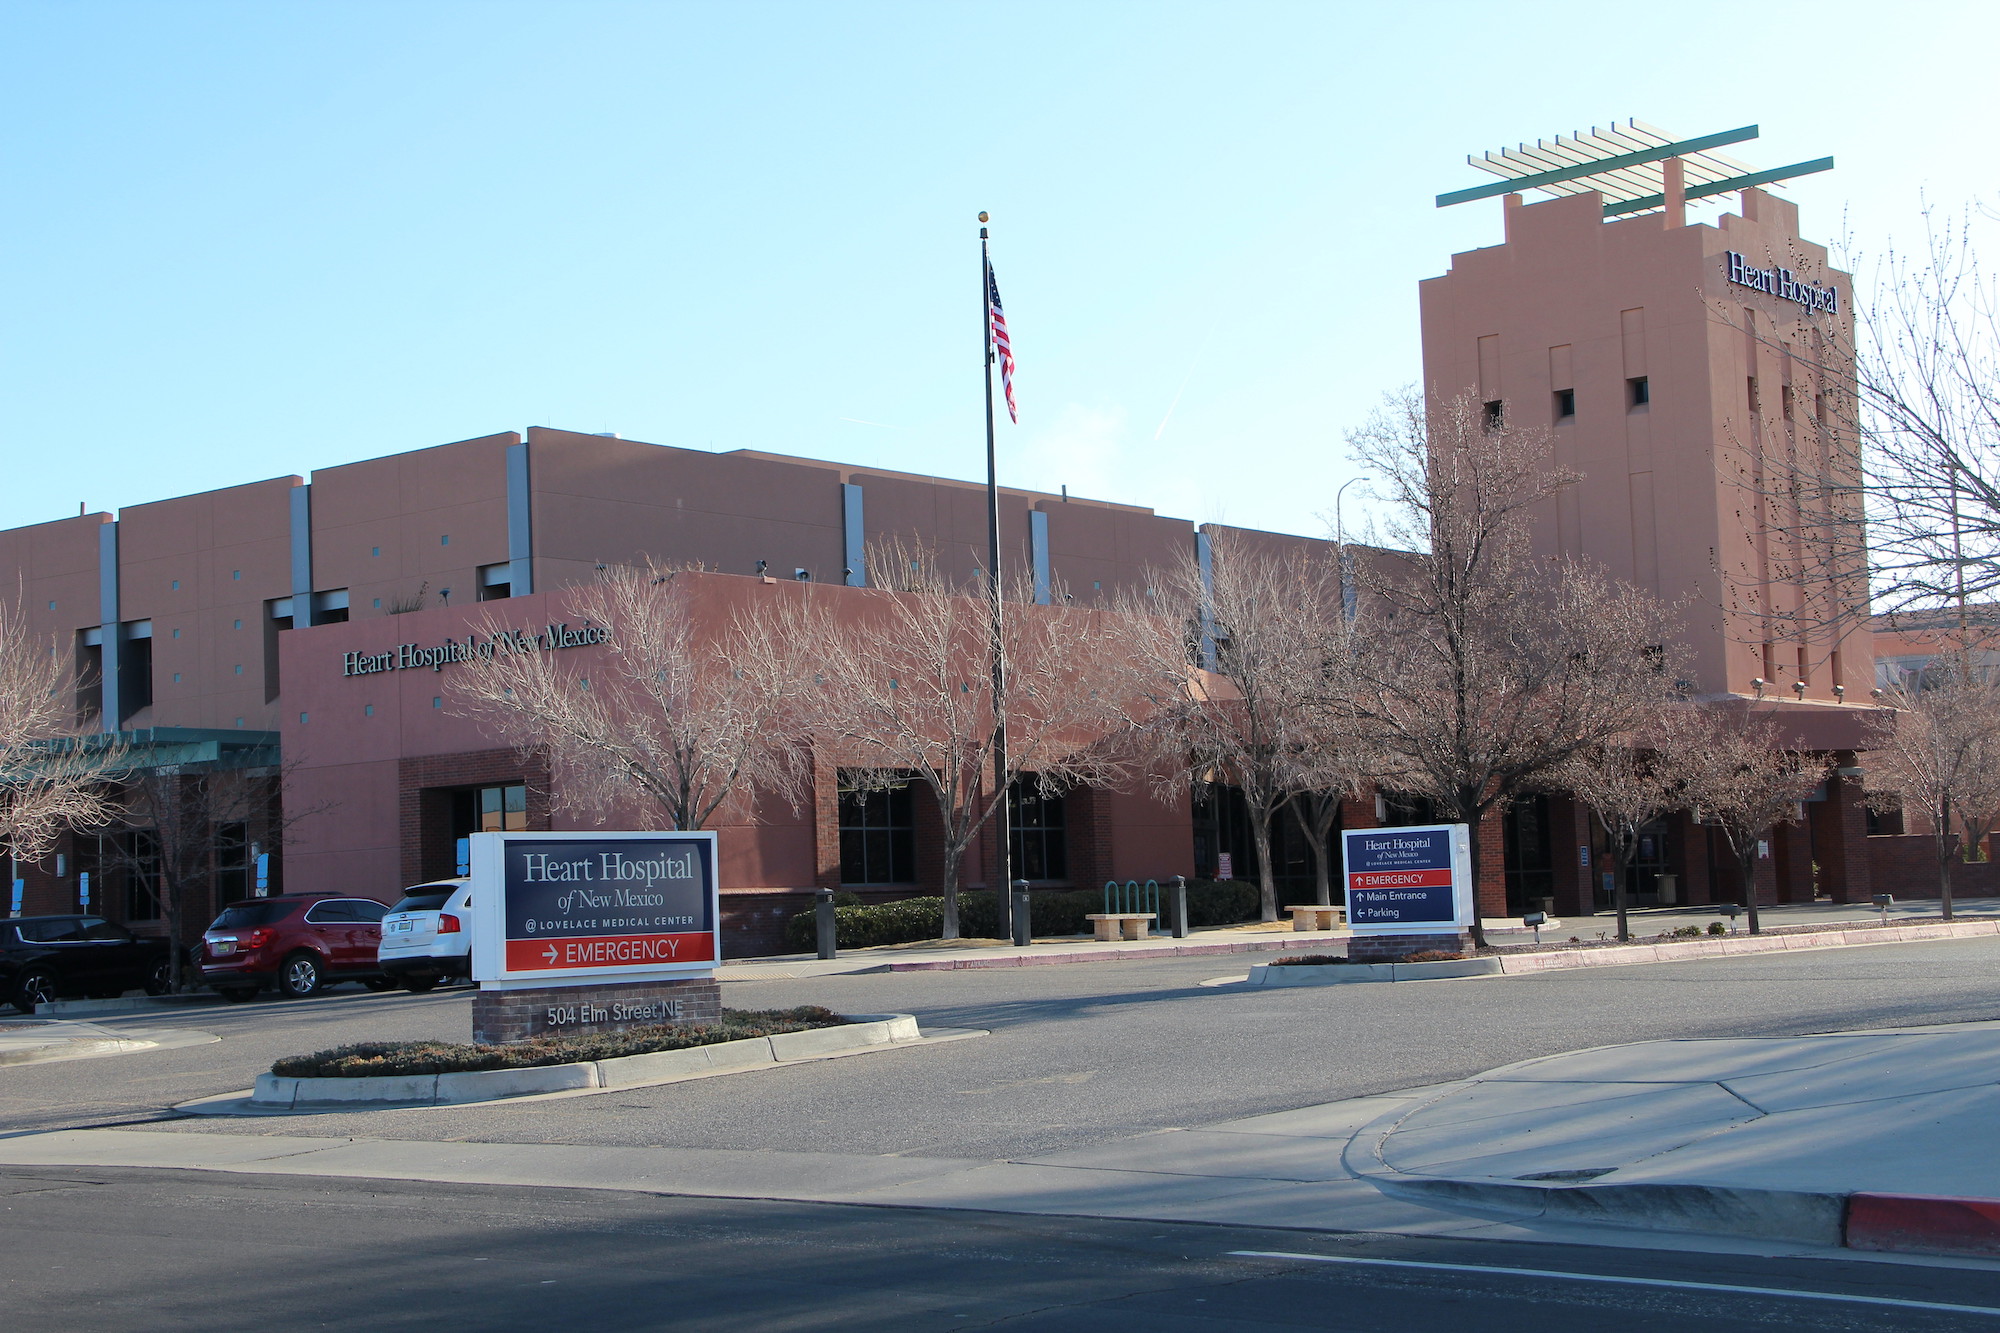 Picture of Heart Hospital of New Mexico: Emergency Room 504 Elm St NE, Albuquerque, NM 87102